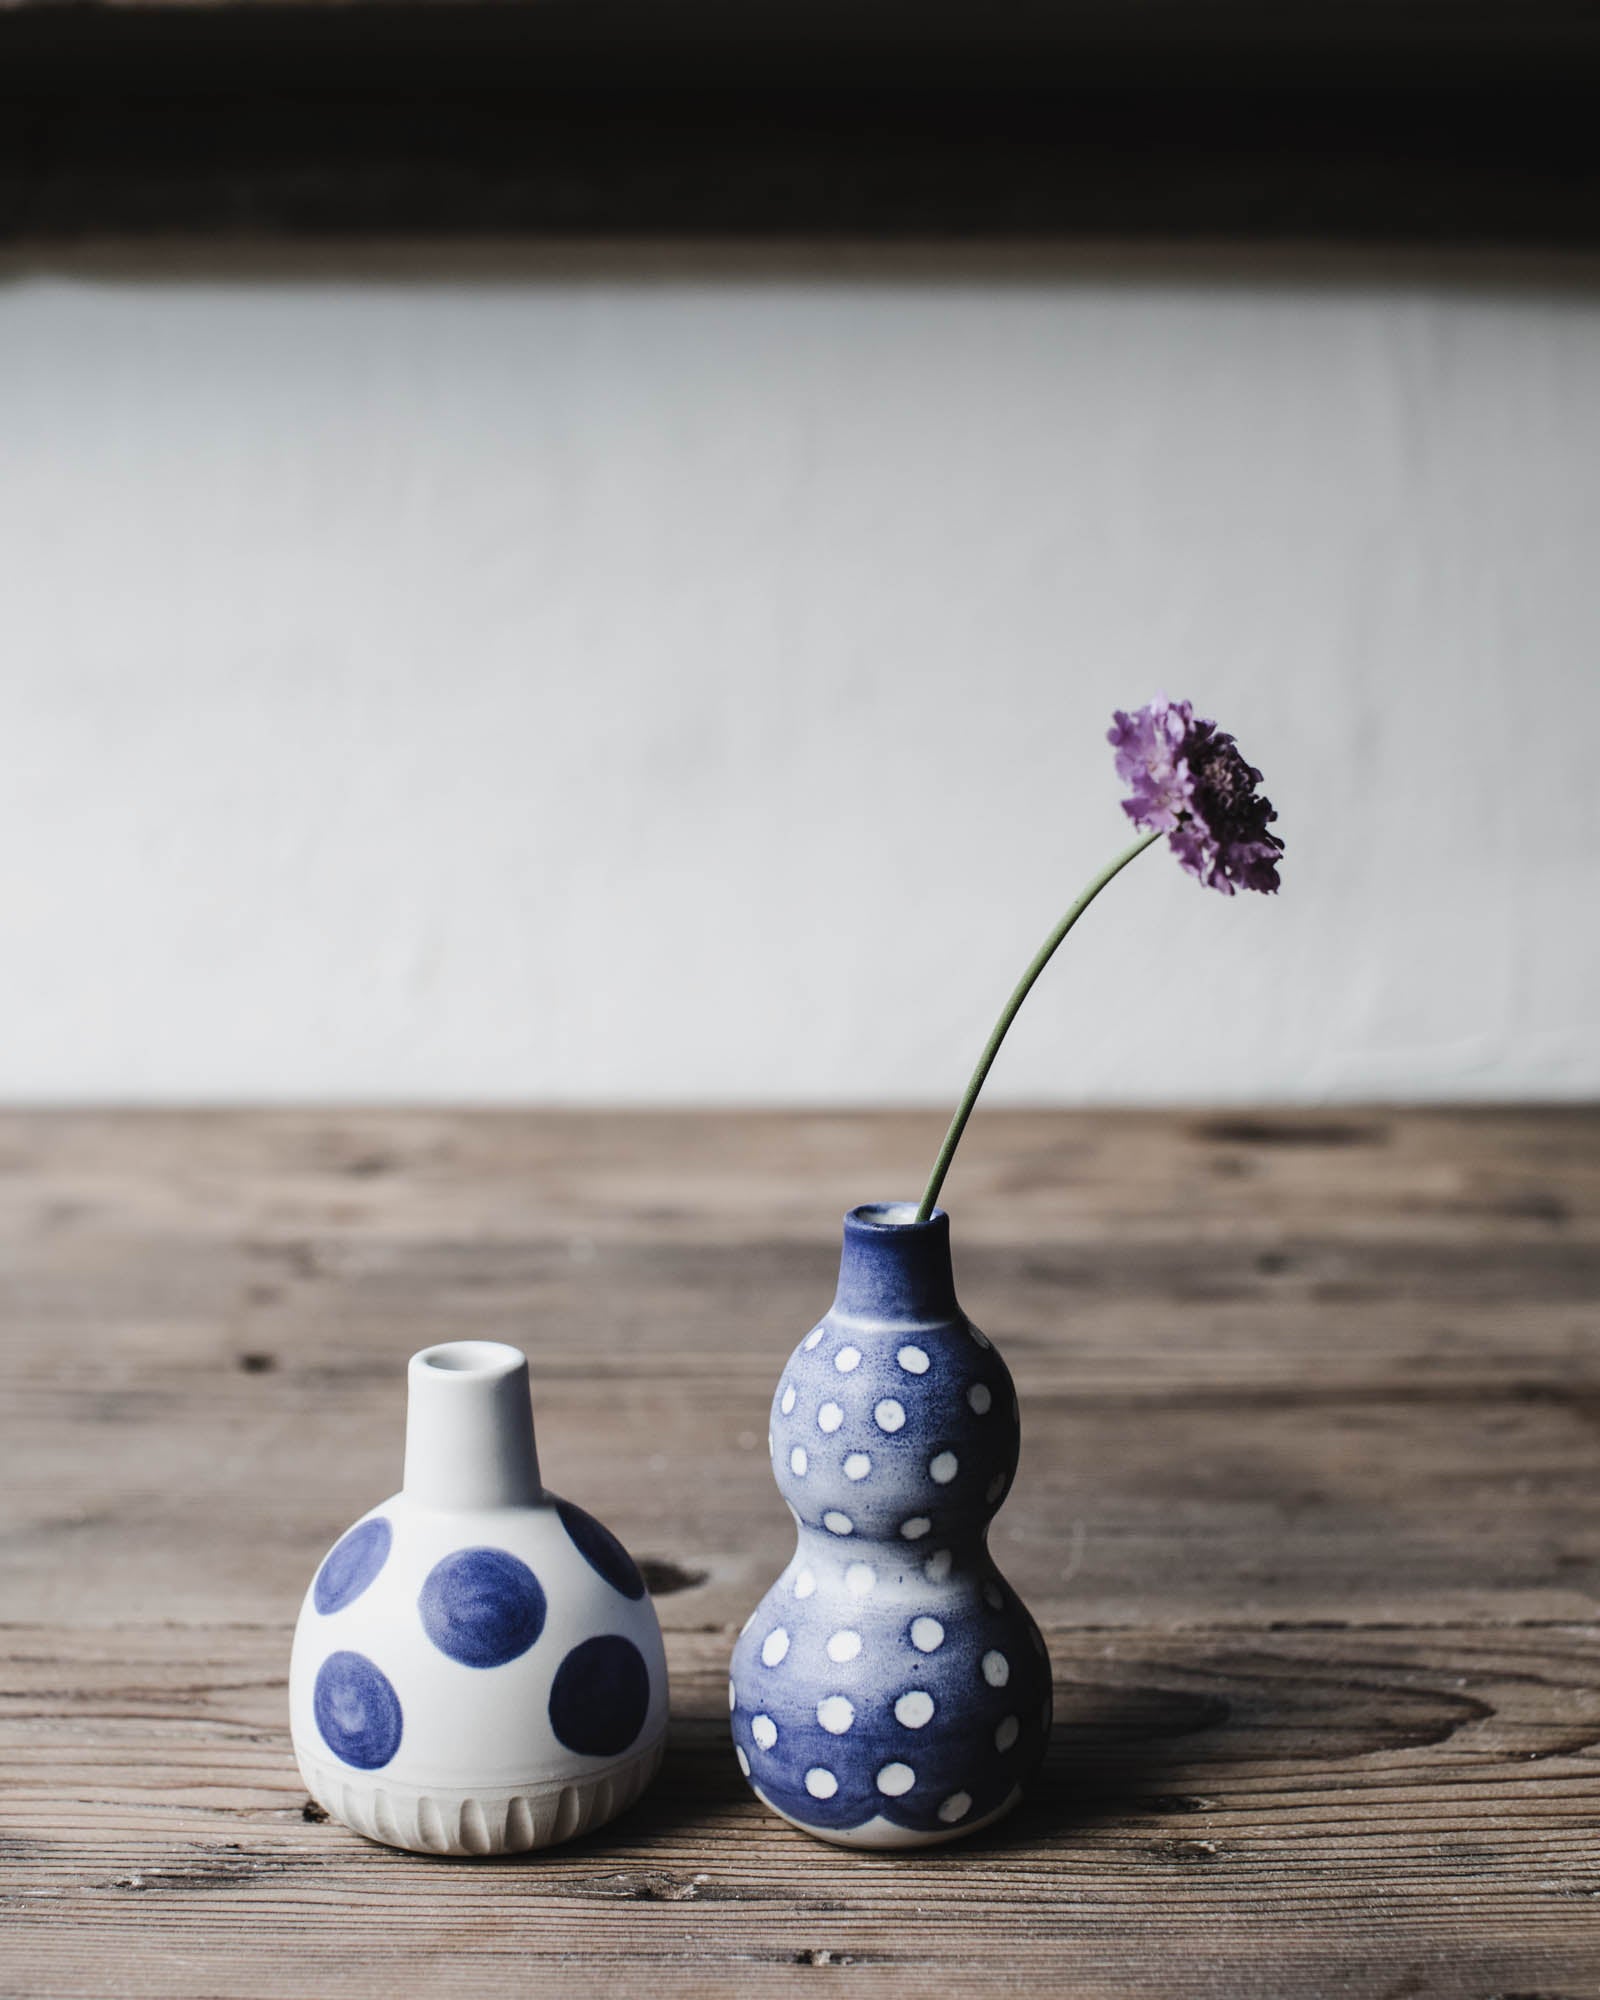 Wheel thrown bud vase with blue and white spots by clay beehive ceramics.